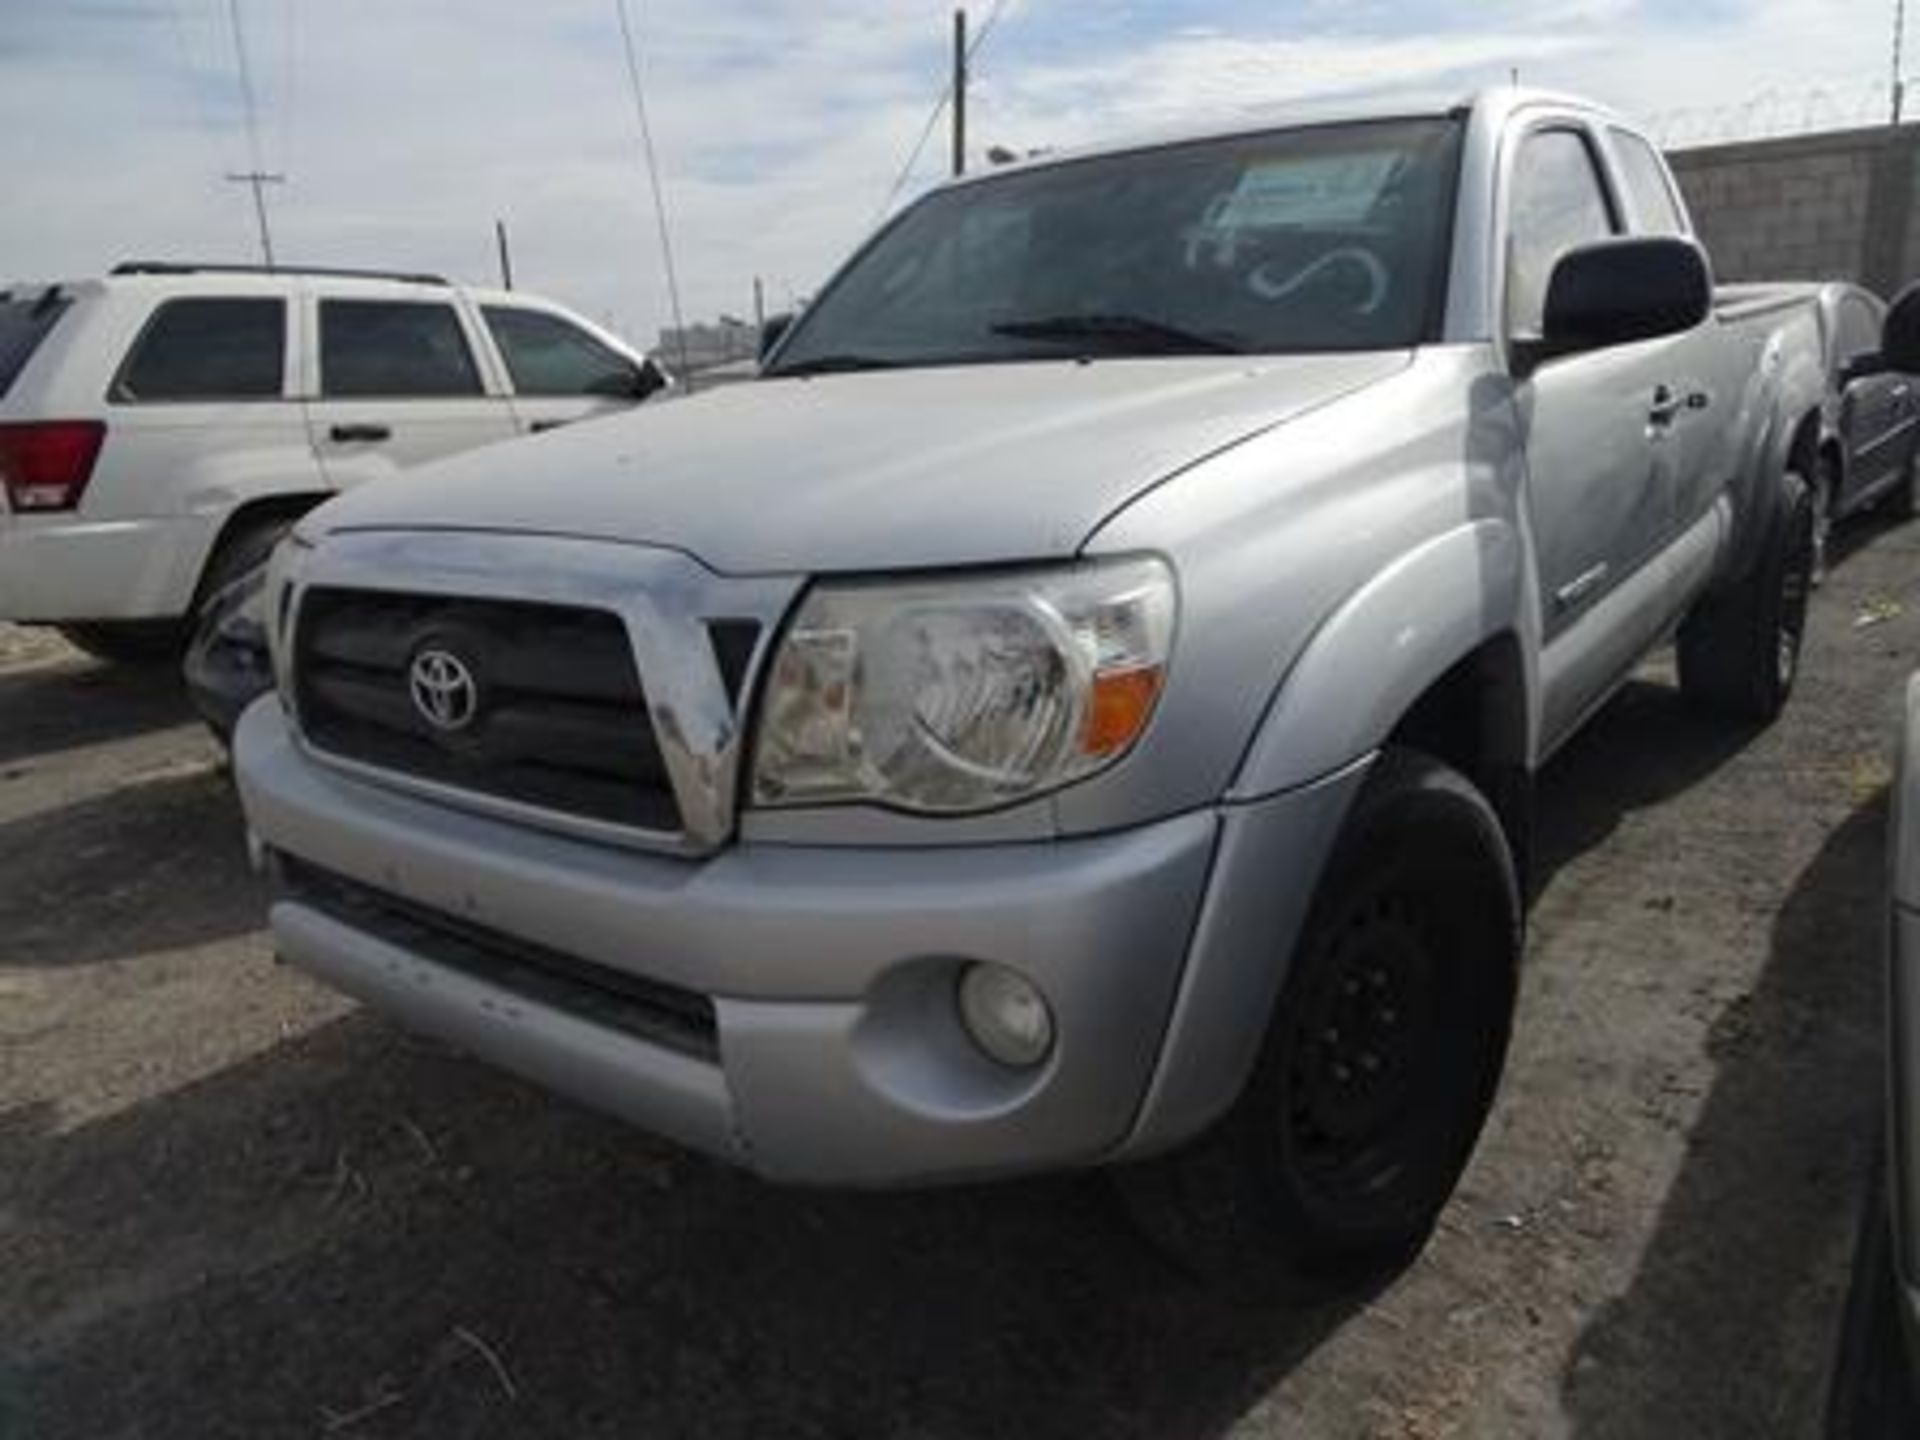 Vehículo Marca Toyota, Linea Tacoma, Tipo Pick Up, Modelo 2007, Color Gris, Located In: Chihuahua, - Bild 3 aus 19